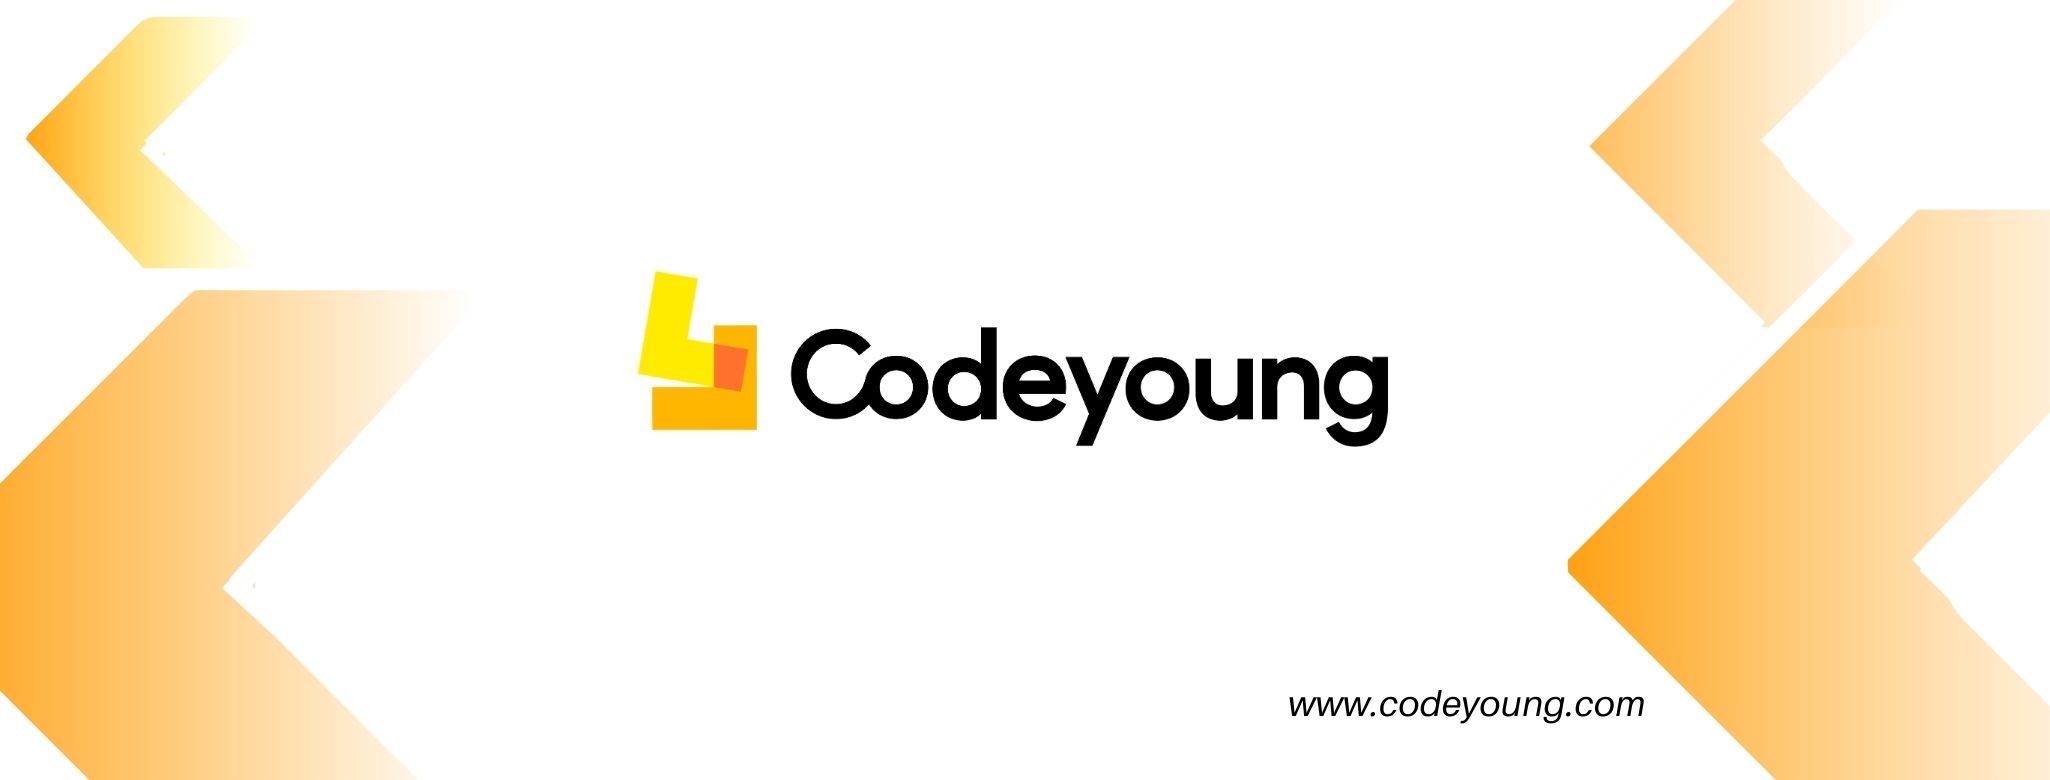 Book a Free Tial class now at Codeyoung for kids